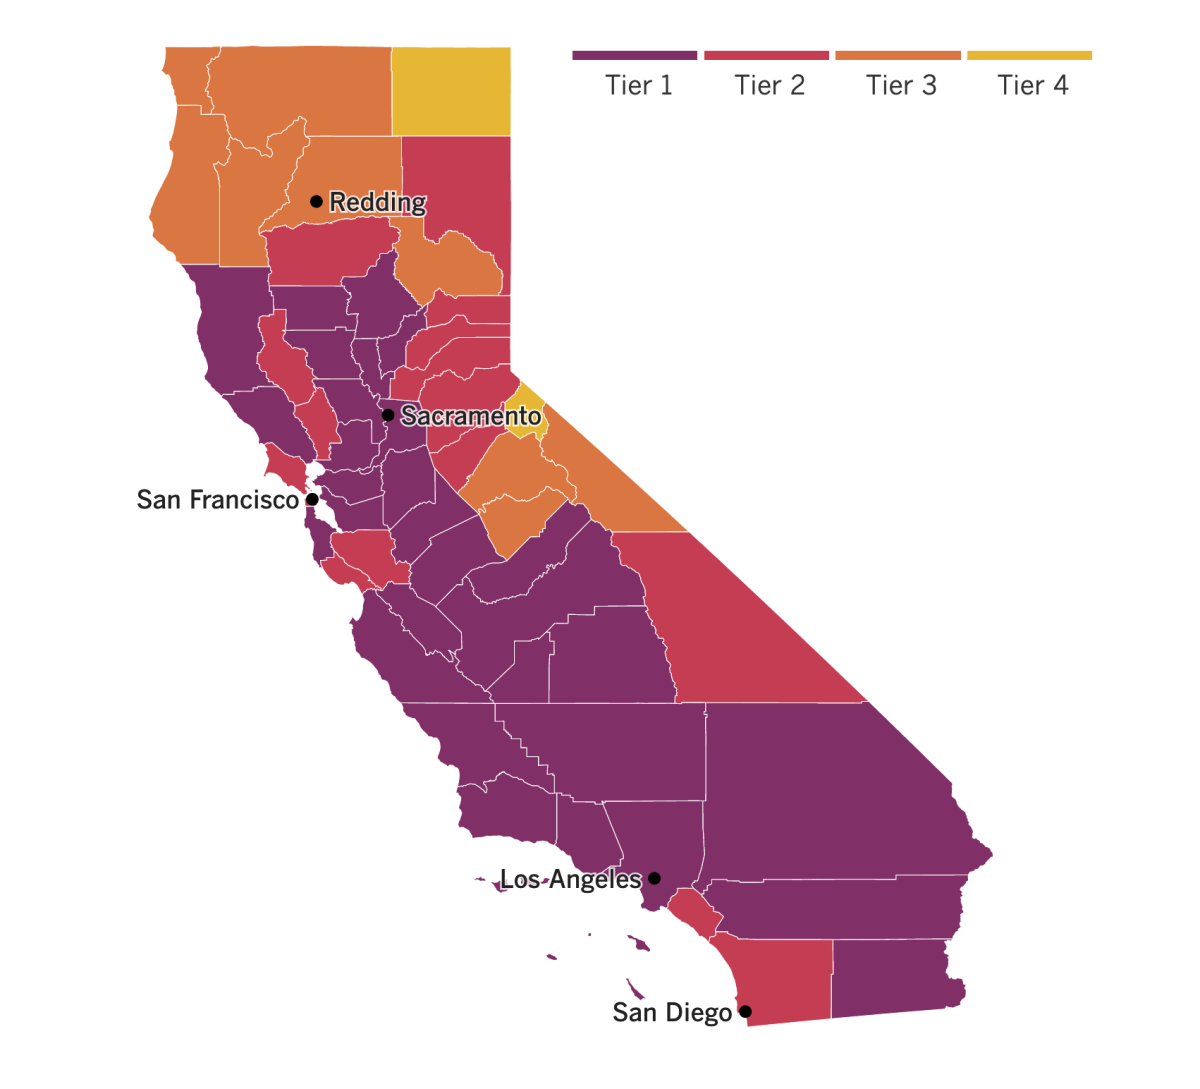 A map of California showing the tiers to which counties have been assigned based on their local level of coronavirus risk.